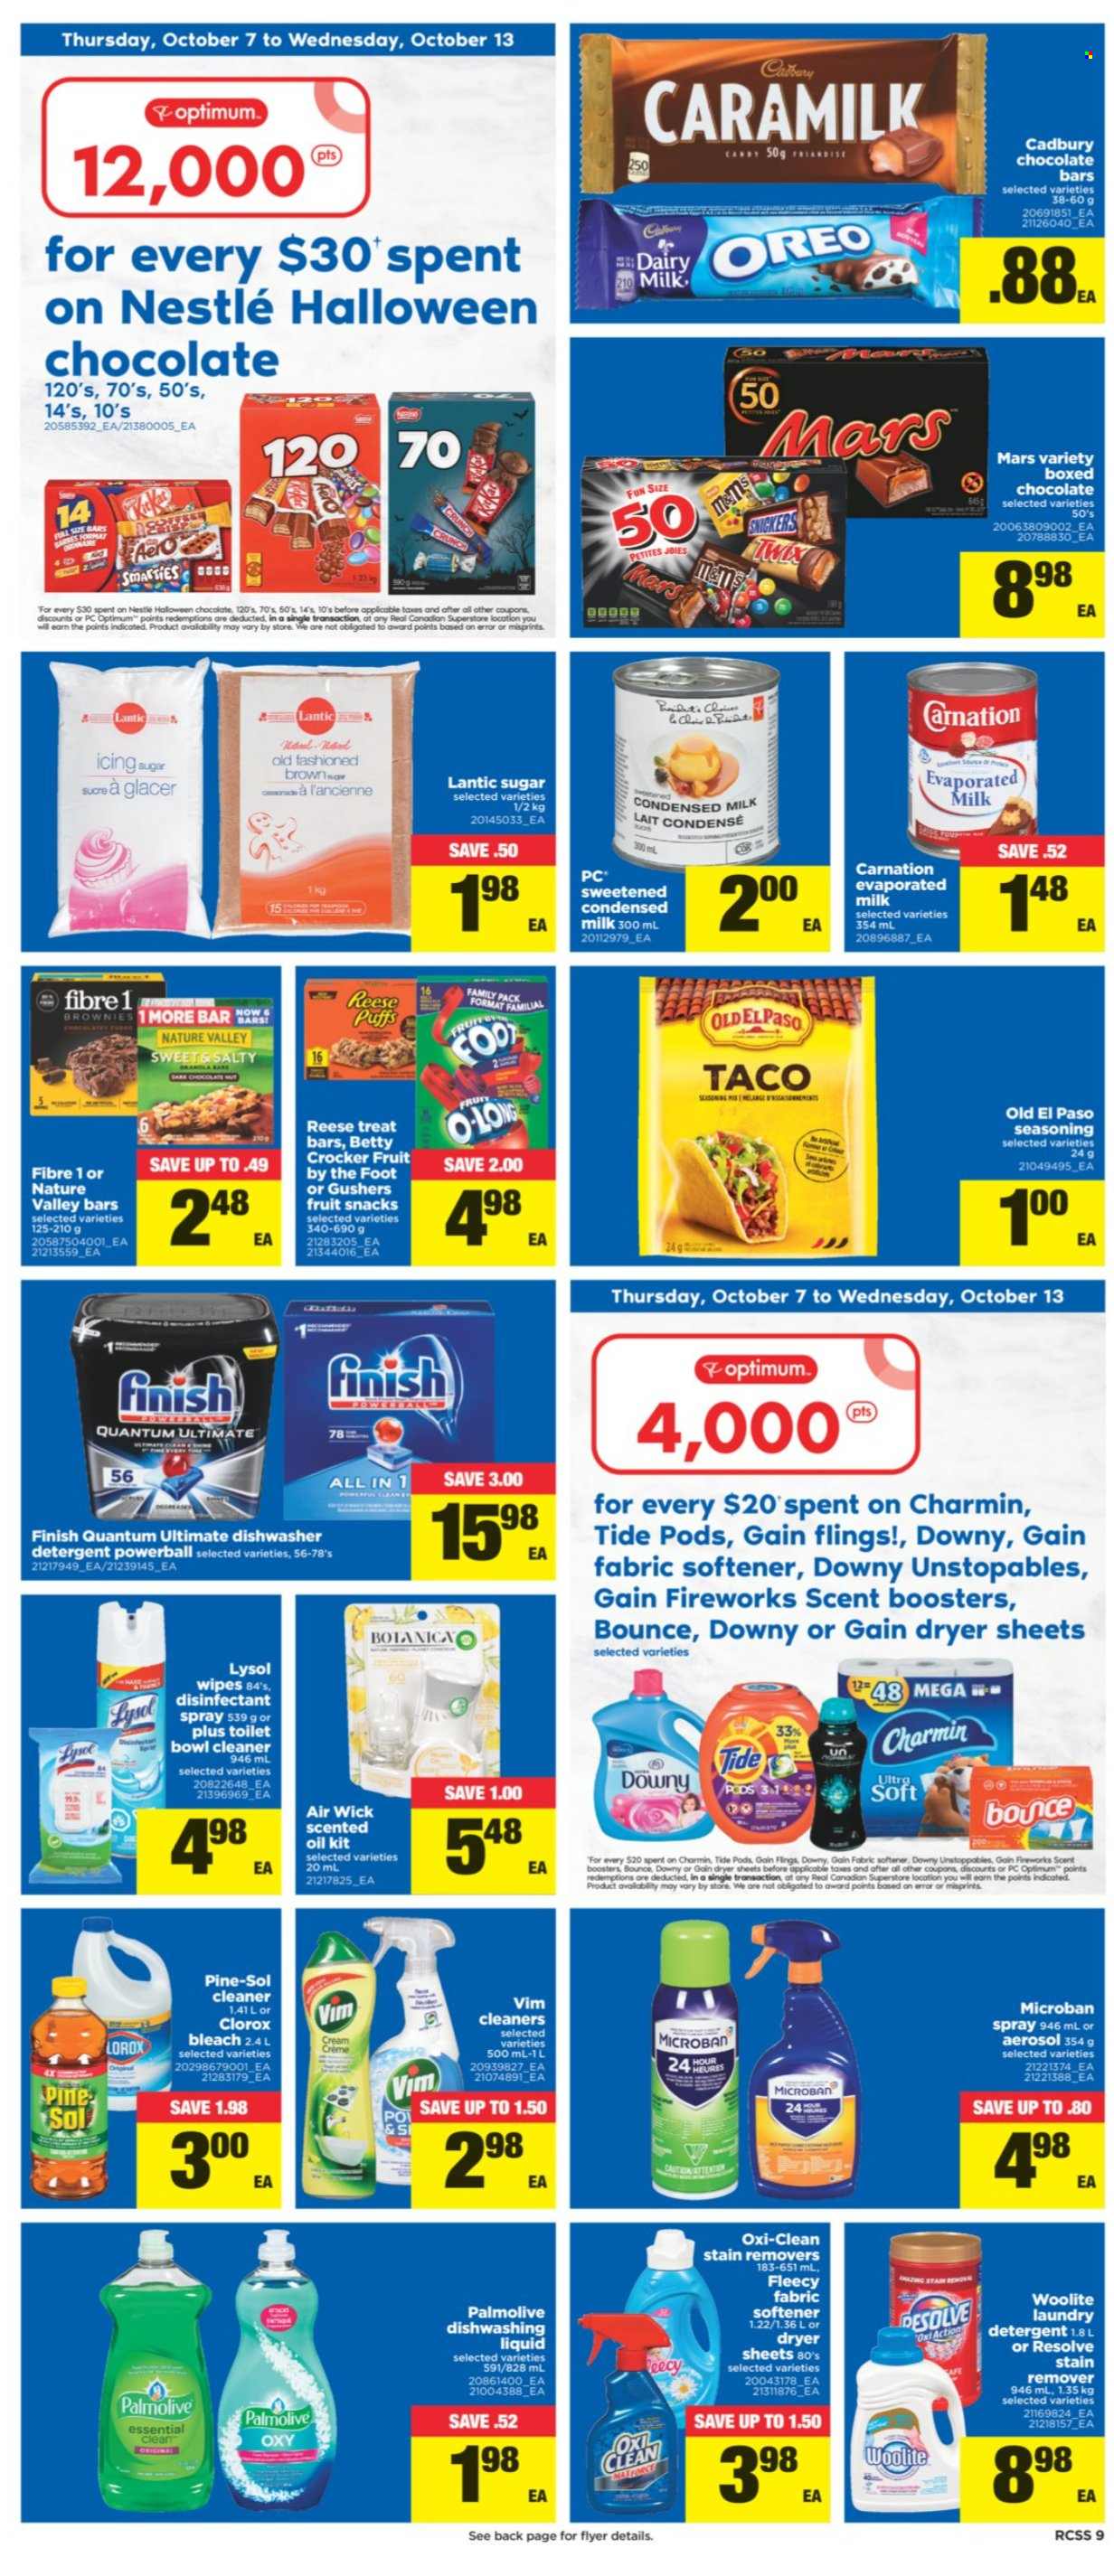 thumbnail - Real Canadian Superstore Flyer - October 07, 2021 - October 13, 2021 - Sales products - Old El Paso, puffs, brownies, evaporated milk, condensed milk, Mars, Cadbury, Dairy Milk, fruit snack, chocolate bar, sugar, Nature Valley, spice, oil, L'Or, wipes, Charmin, Gain, cleaner, bleach, Lysol, Clorox, Woolite, Pine-Sol, Tide, Unstopables, fabric softener, laundry detergent, Bounce, dryer sheets, scent booster, Gain Fireworks, dishwashing liquid, Finish Powerball, Finish Quantum Ultimate, Palmolive, antibacterial spray, Air Wick, scented oil, Optimum, Halloween, Oreo, Nestlé, detergent, Smarties, desinfection. Page 9.